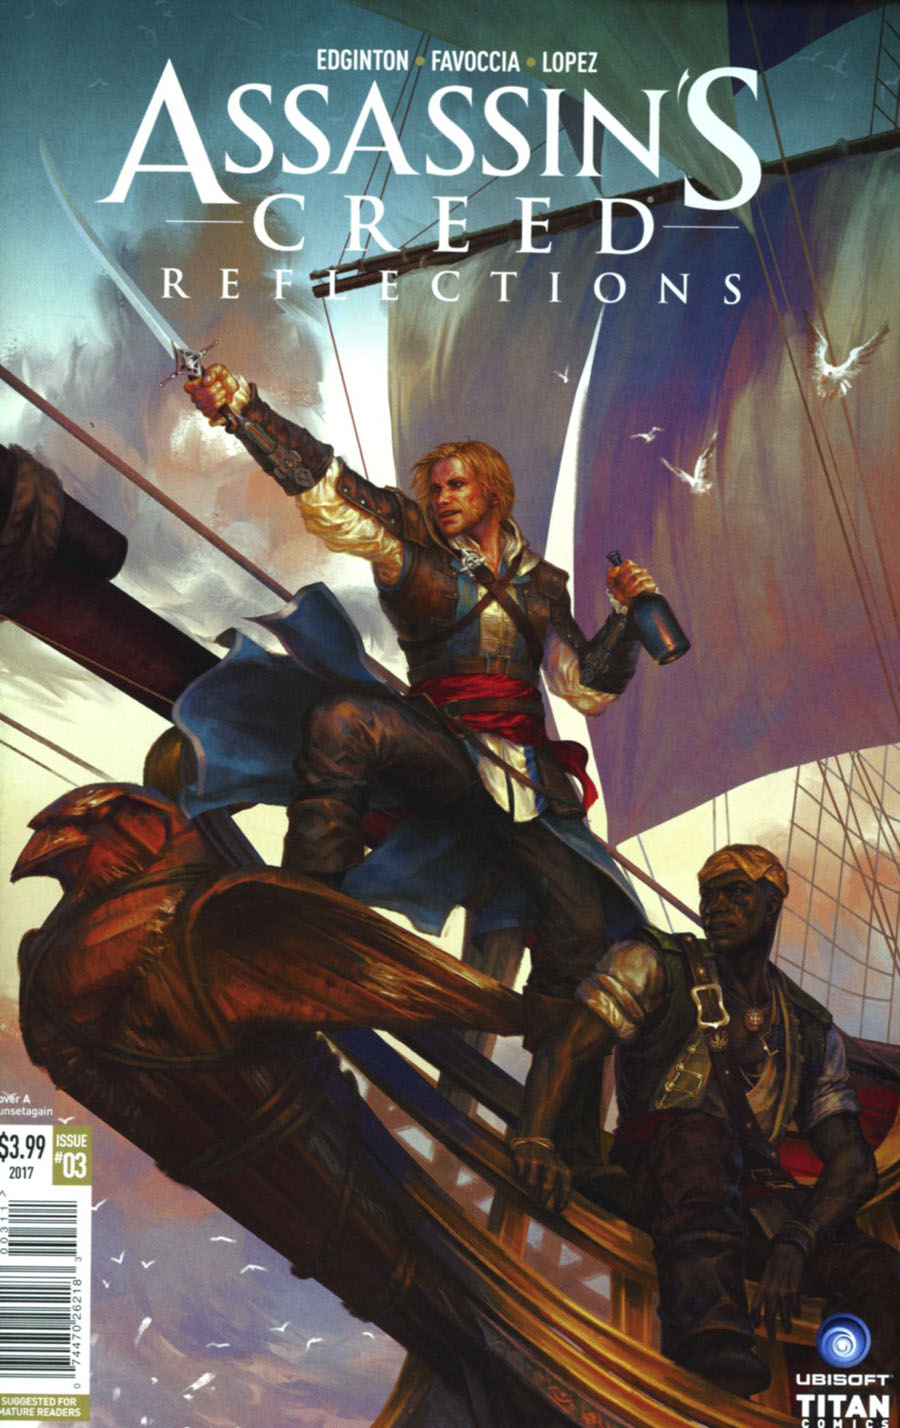 Assassins Creed Reflections #3 Cover A Sunsetagain Cover